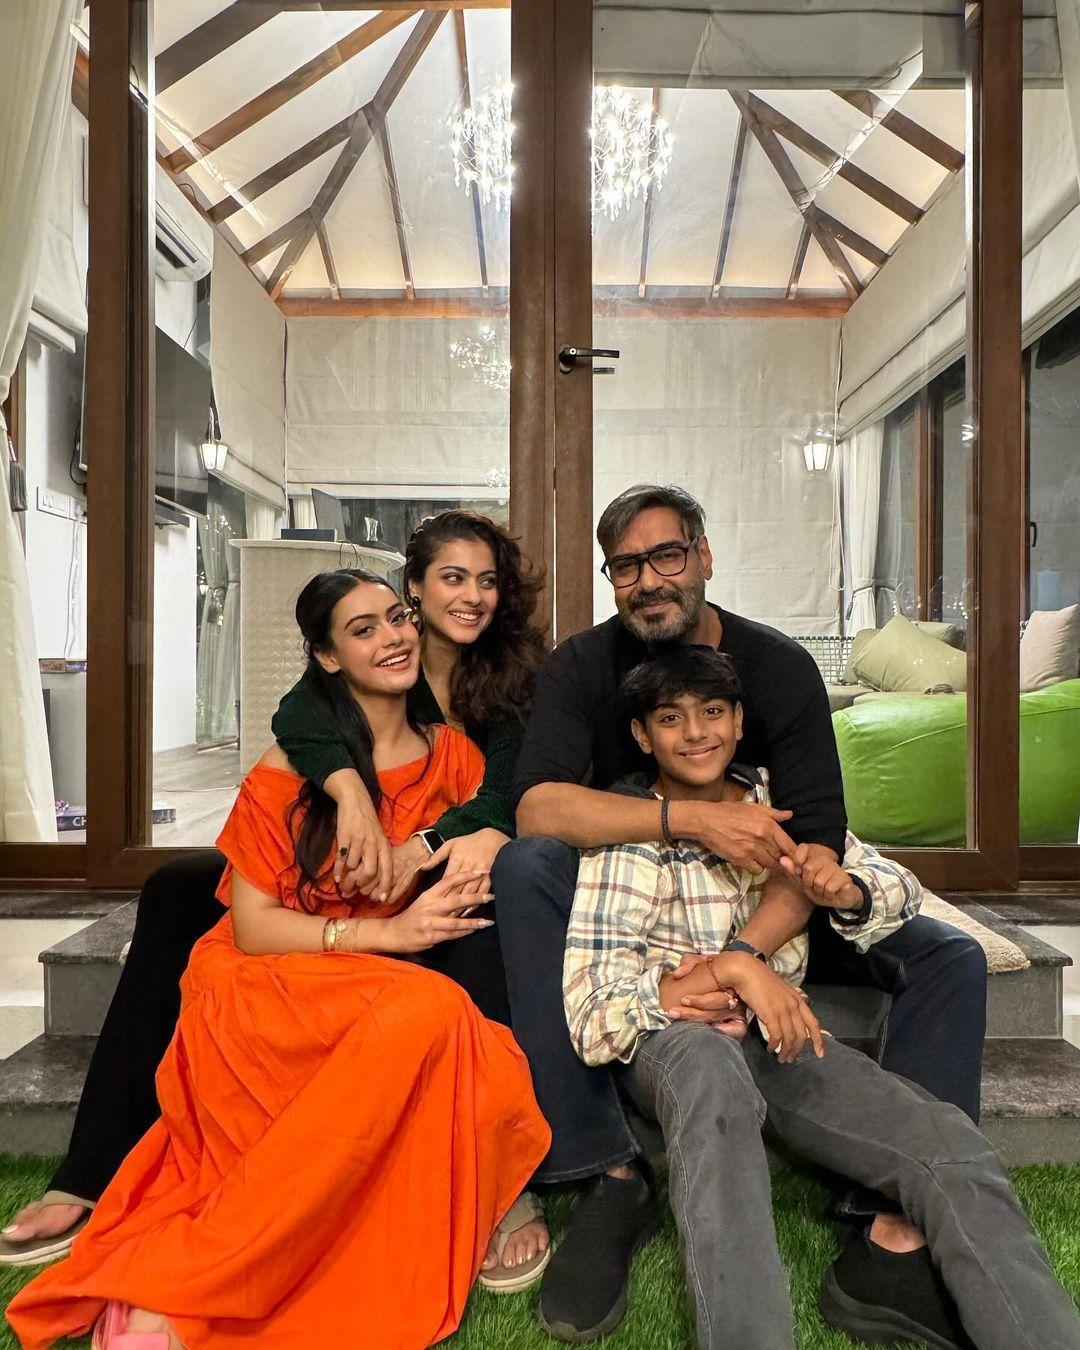 Ajay Devgn and Kajol celebrated the new year with their family. The Singham actor dropped the perfect click from their celebration